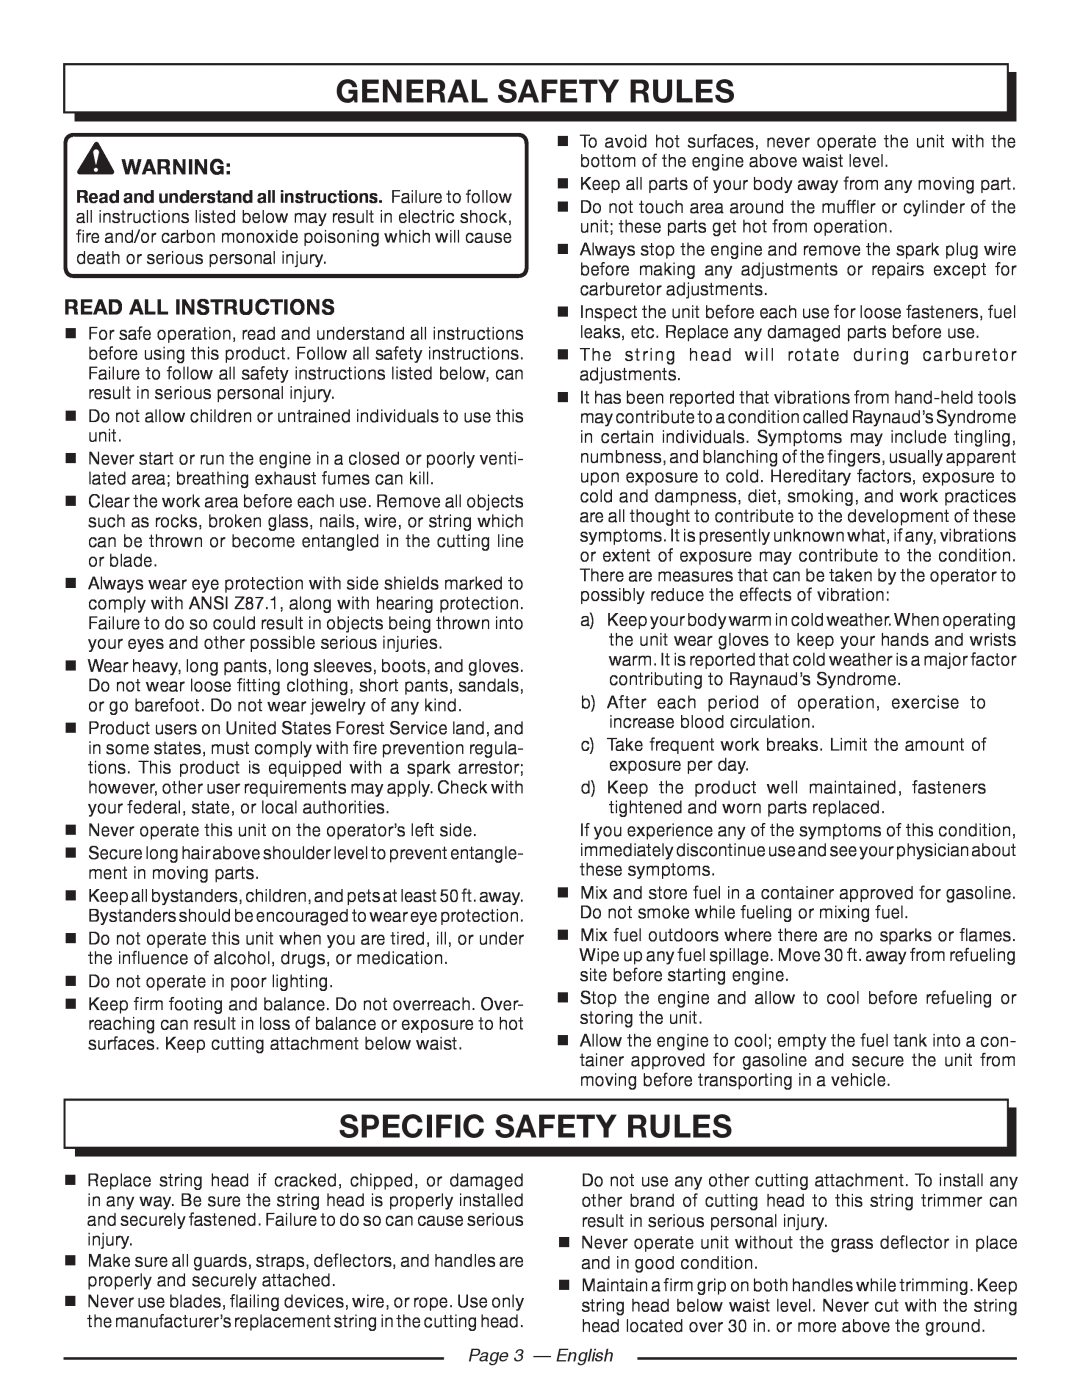 Homelite 26CS UT22600, 26SS UT22650 General Safety Rules, Specific Safety Rules, read all instructions, Page 3 - English 